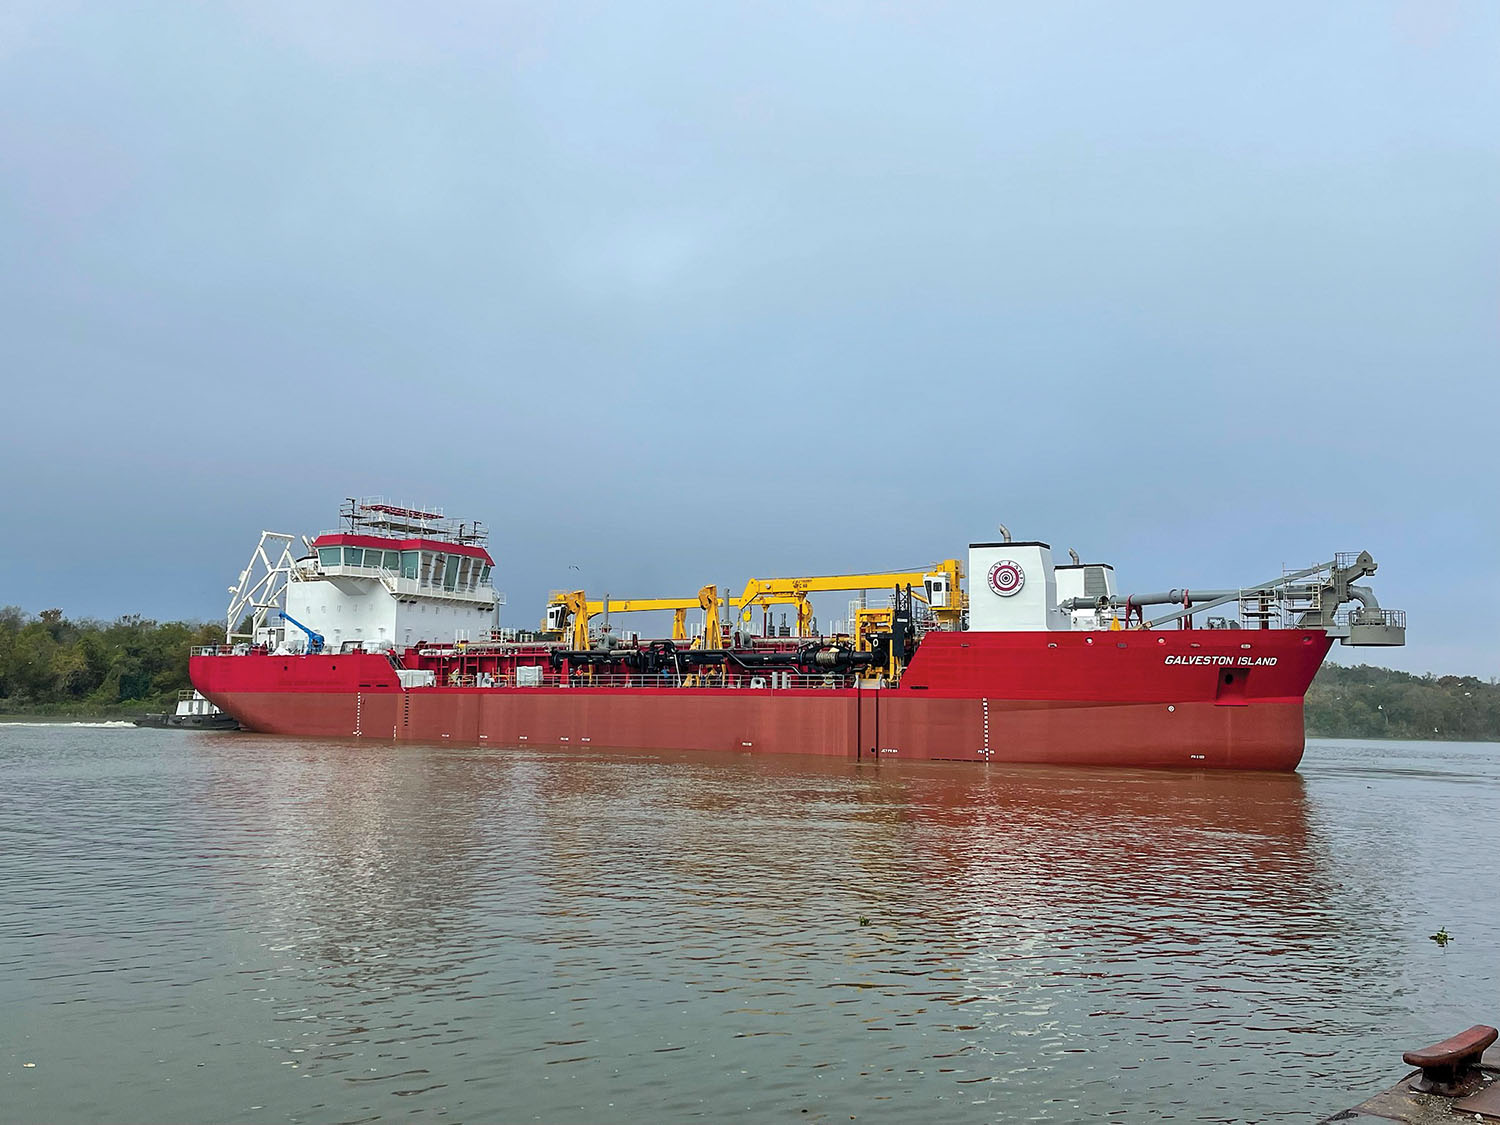 The 6,500-cubic-yard-capacity dredge Galveston Island is the first of two sister trailing suction hopper dredges that Conrad Shipyard is building for Great Lakes Dredge & Dock. (photo courtesy of Great Lakes Dredge & Dock)